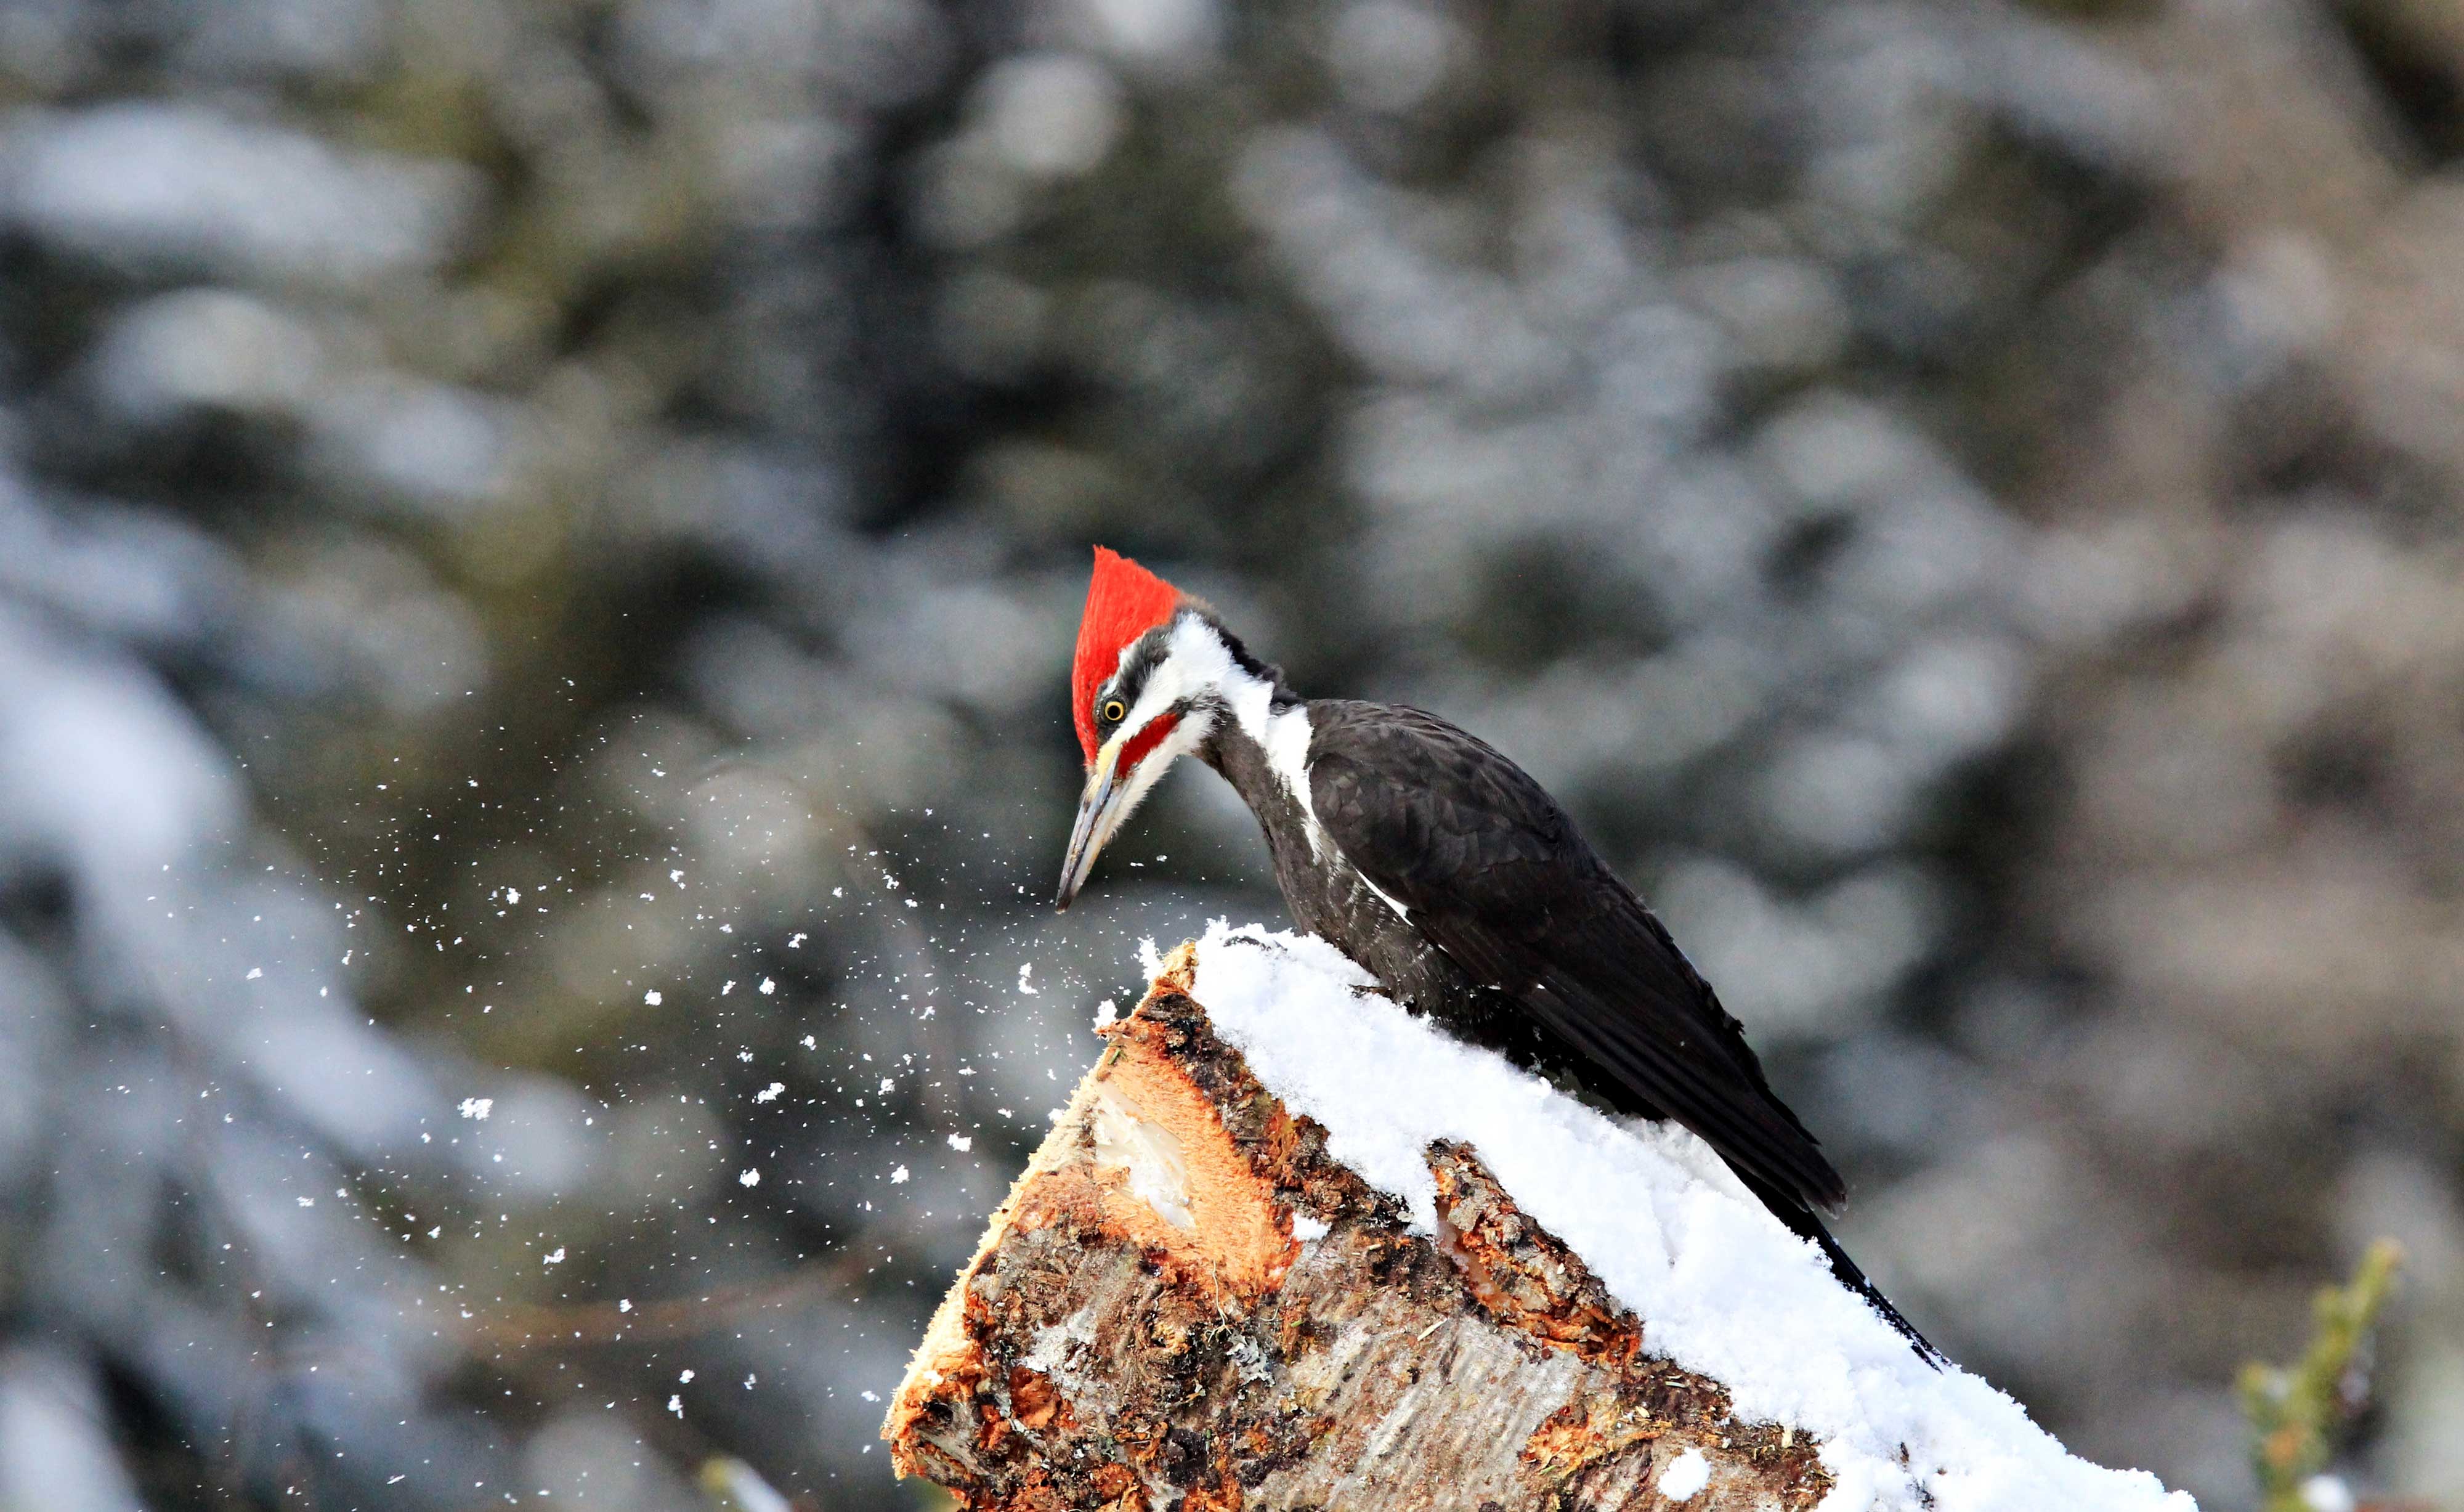 Pileated woodpecker pecking away on a log